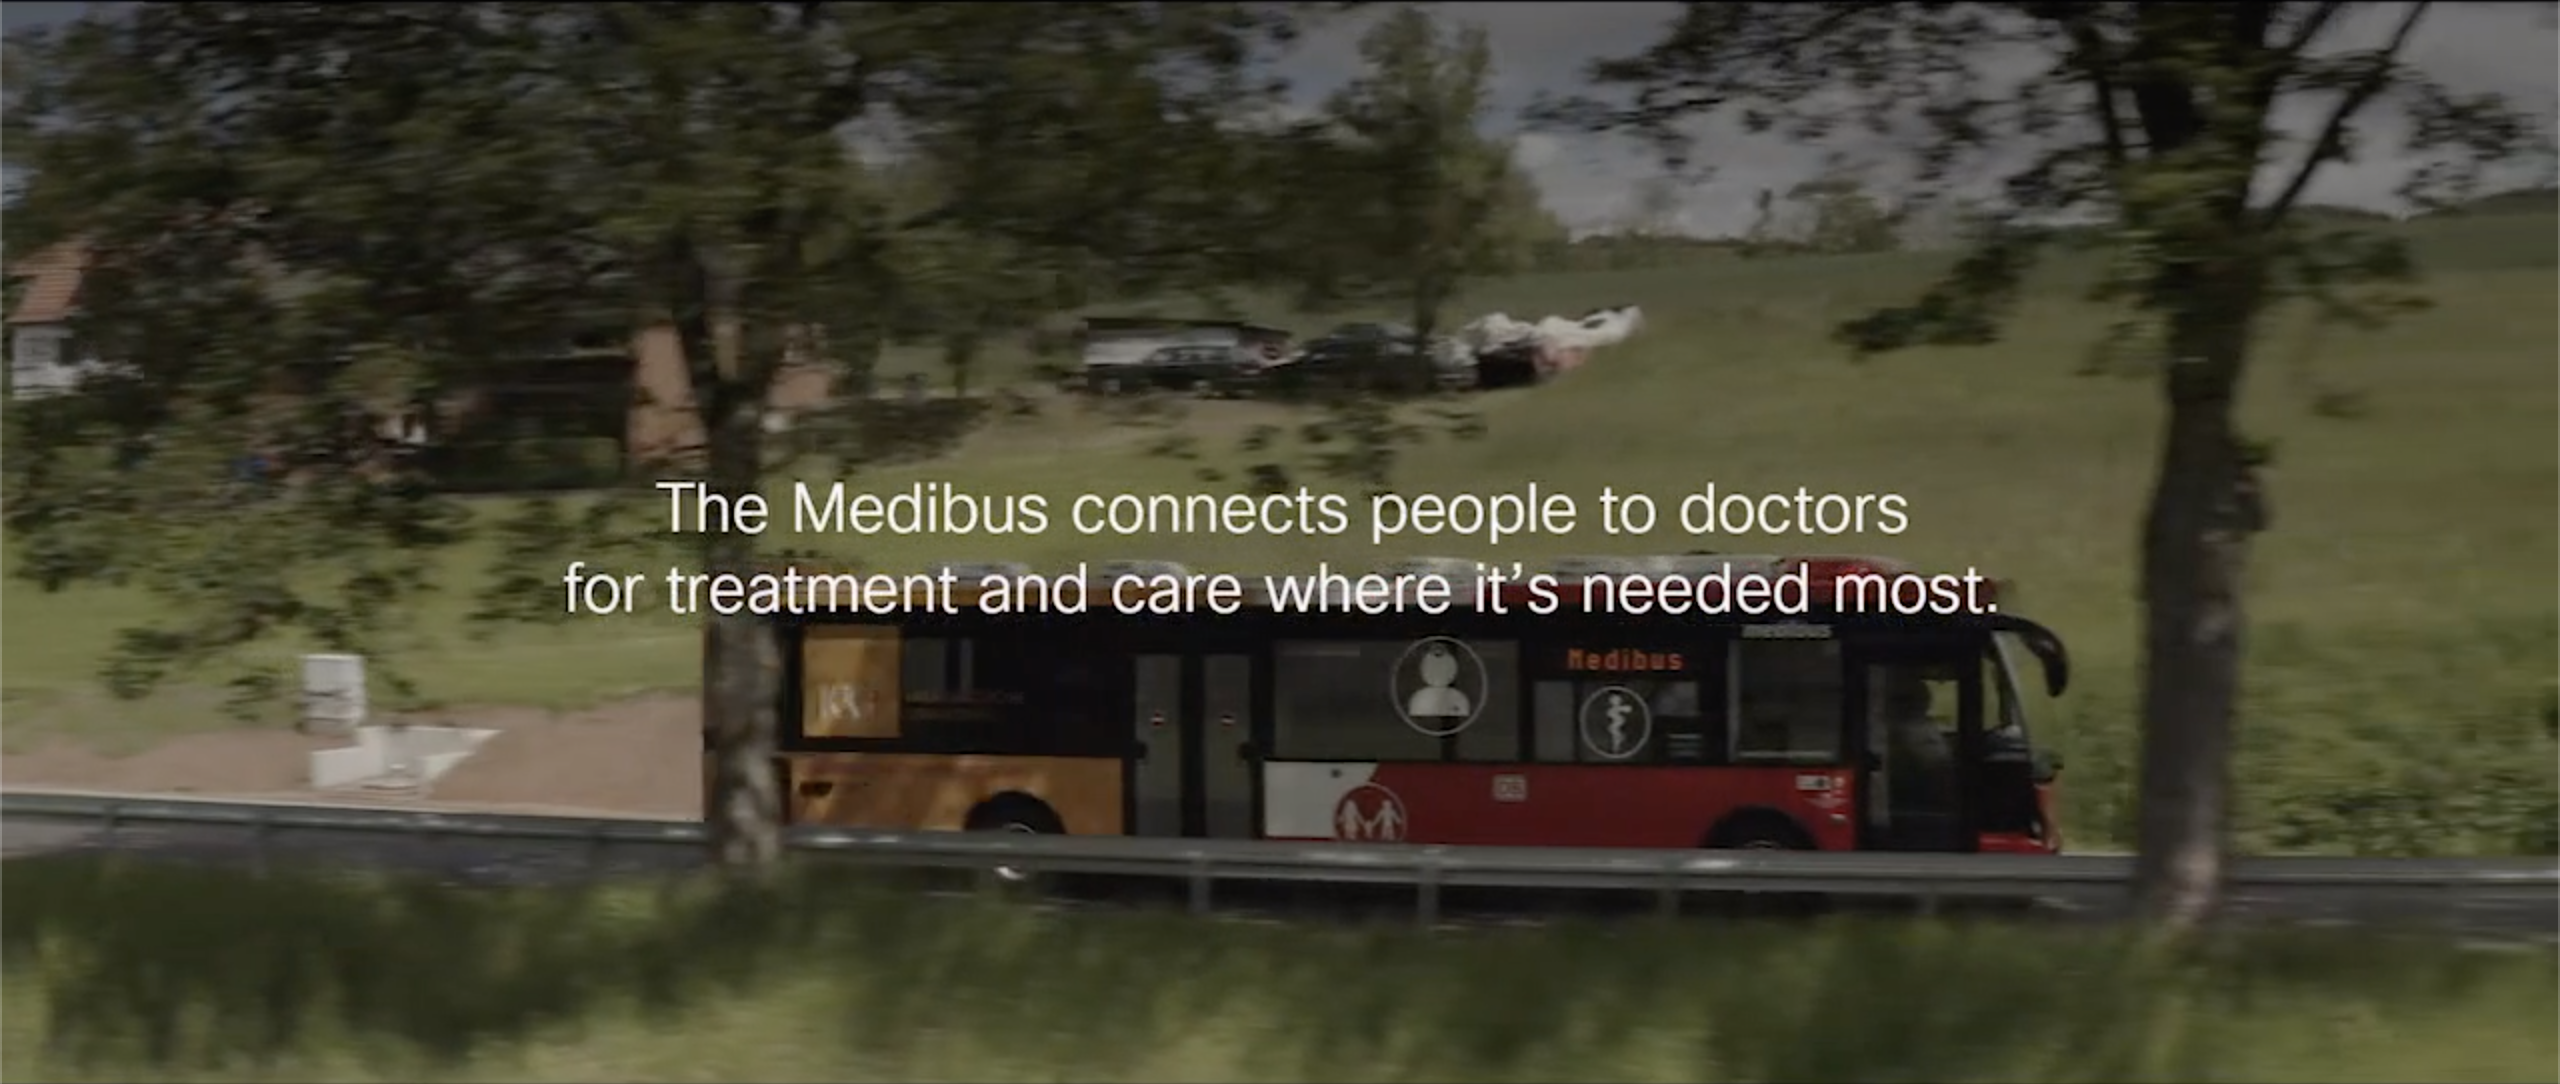 The Medibus connects people to doctors for treatment and care where it's needed most.